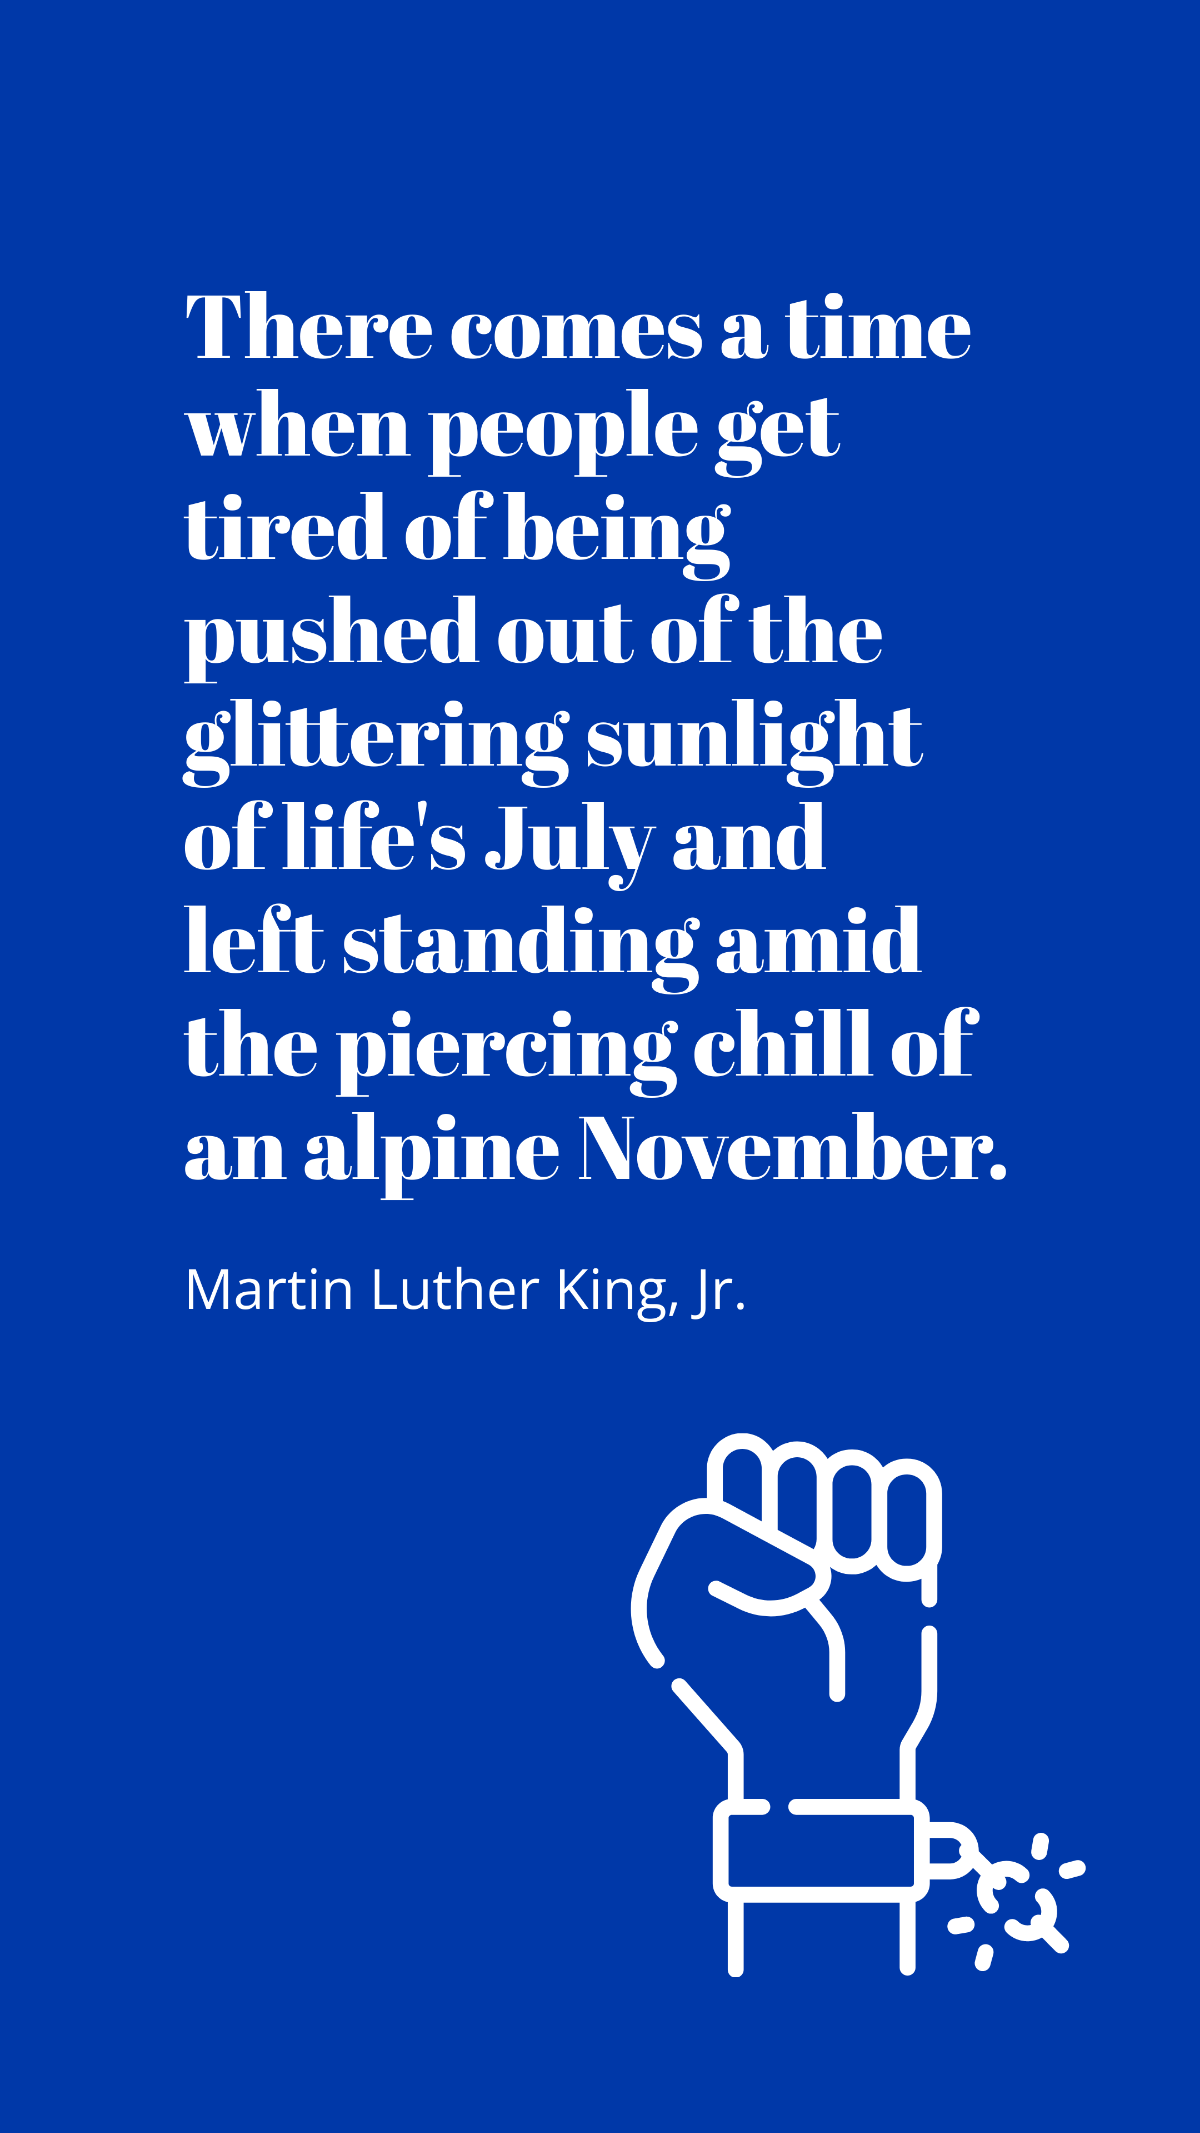 Martin Luther King, Jr. - There comes a time when people get tired of being pushed out of the glittering sunlight of life's July and left standing amid the piercing chill of an alpine November. Templa